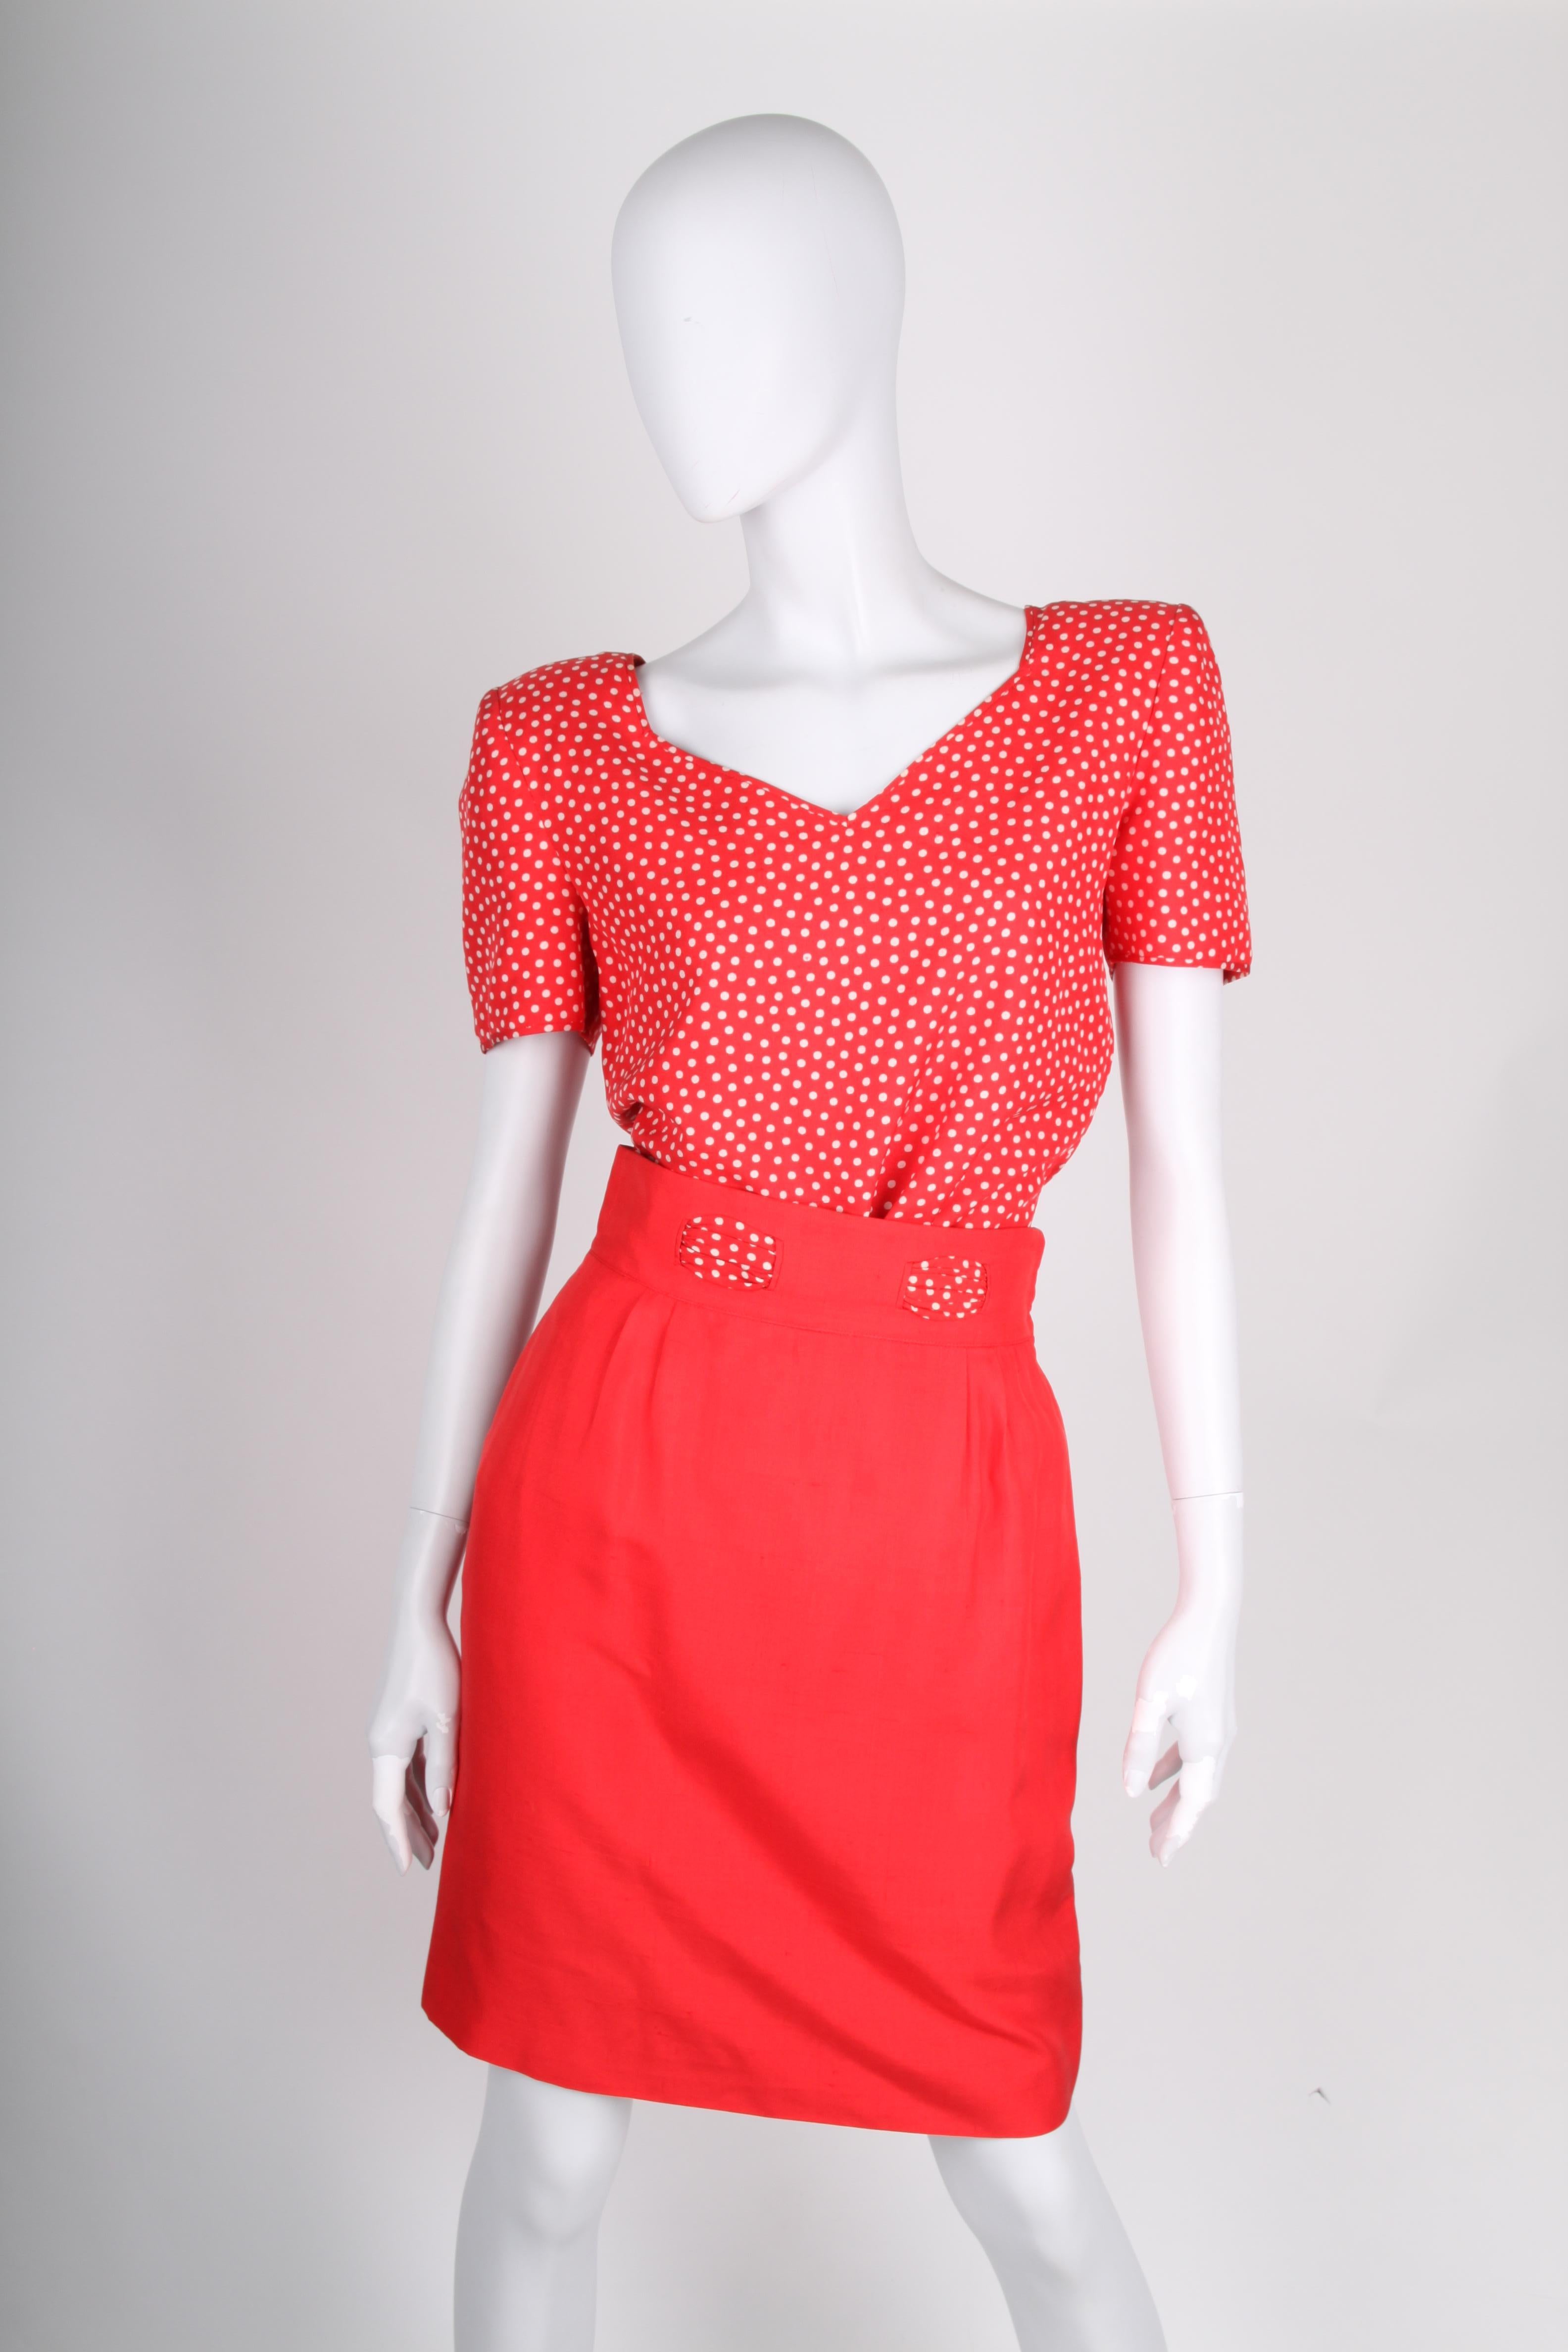 Preppy 2-piece suit by Valentino NIGHT: a skirt and a top.

The dotted top has a V-neck, short sleeves and zip closure on the left side. Padding in the shoulders, no lining.

The short skirt is straight and the waistband is decorated with the dotted